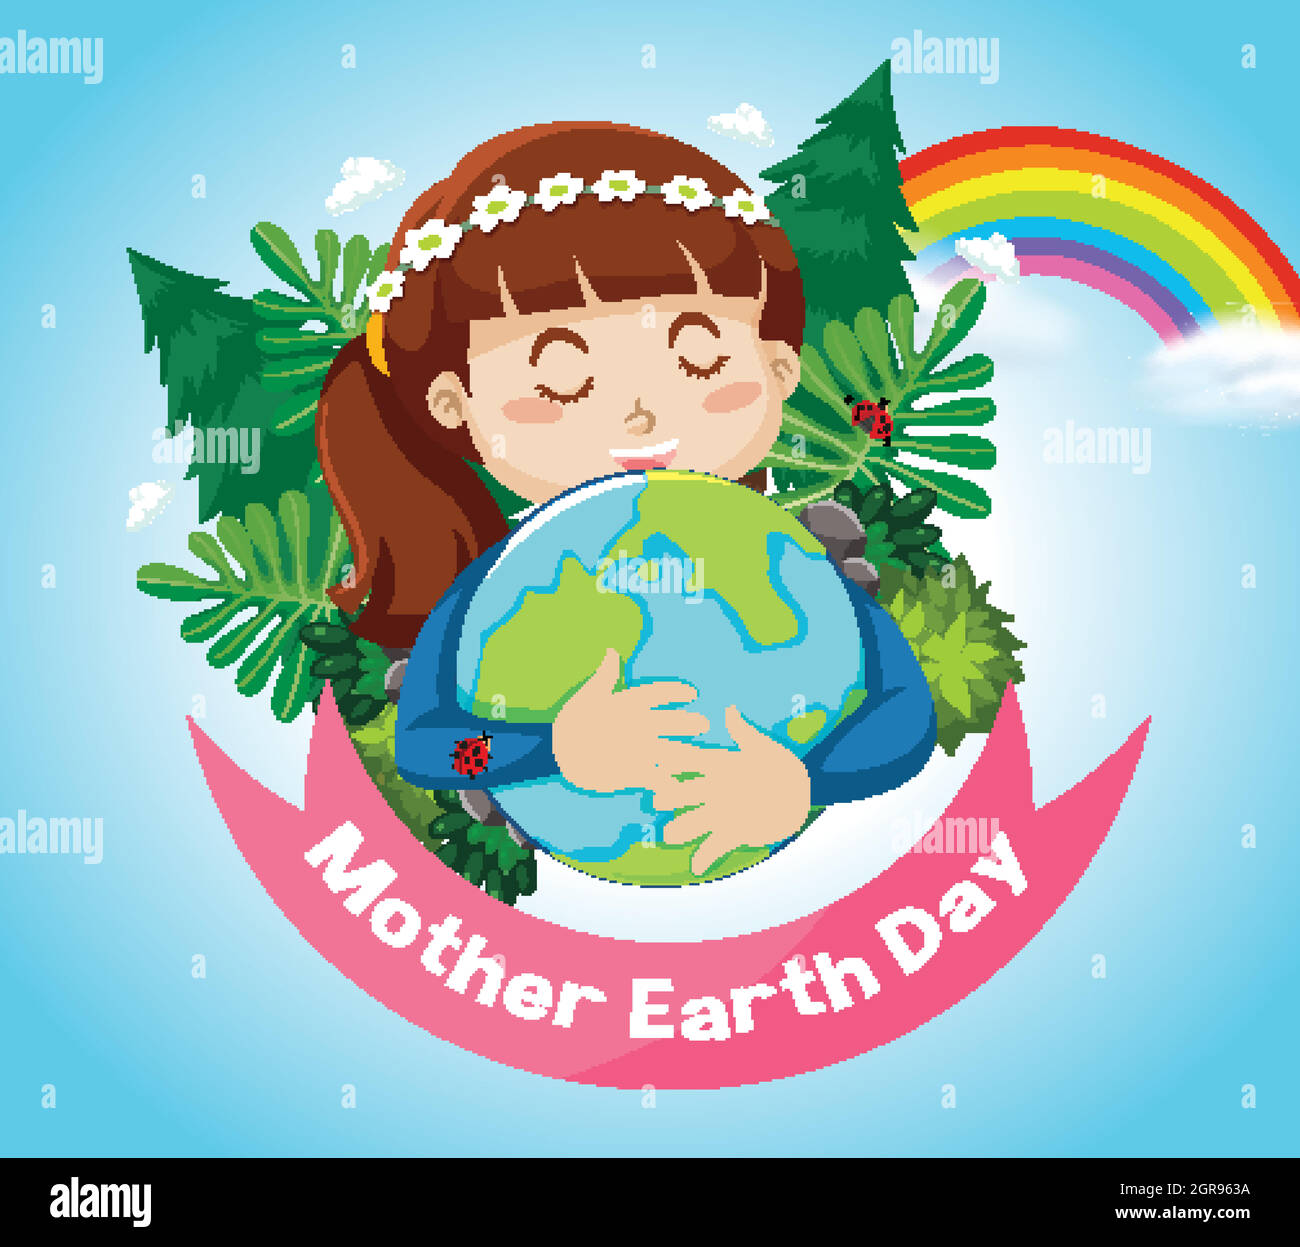 Poster design for mother earth day with Stock Vector